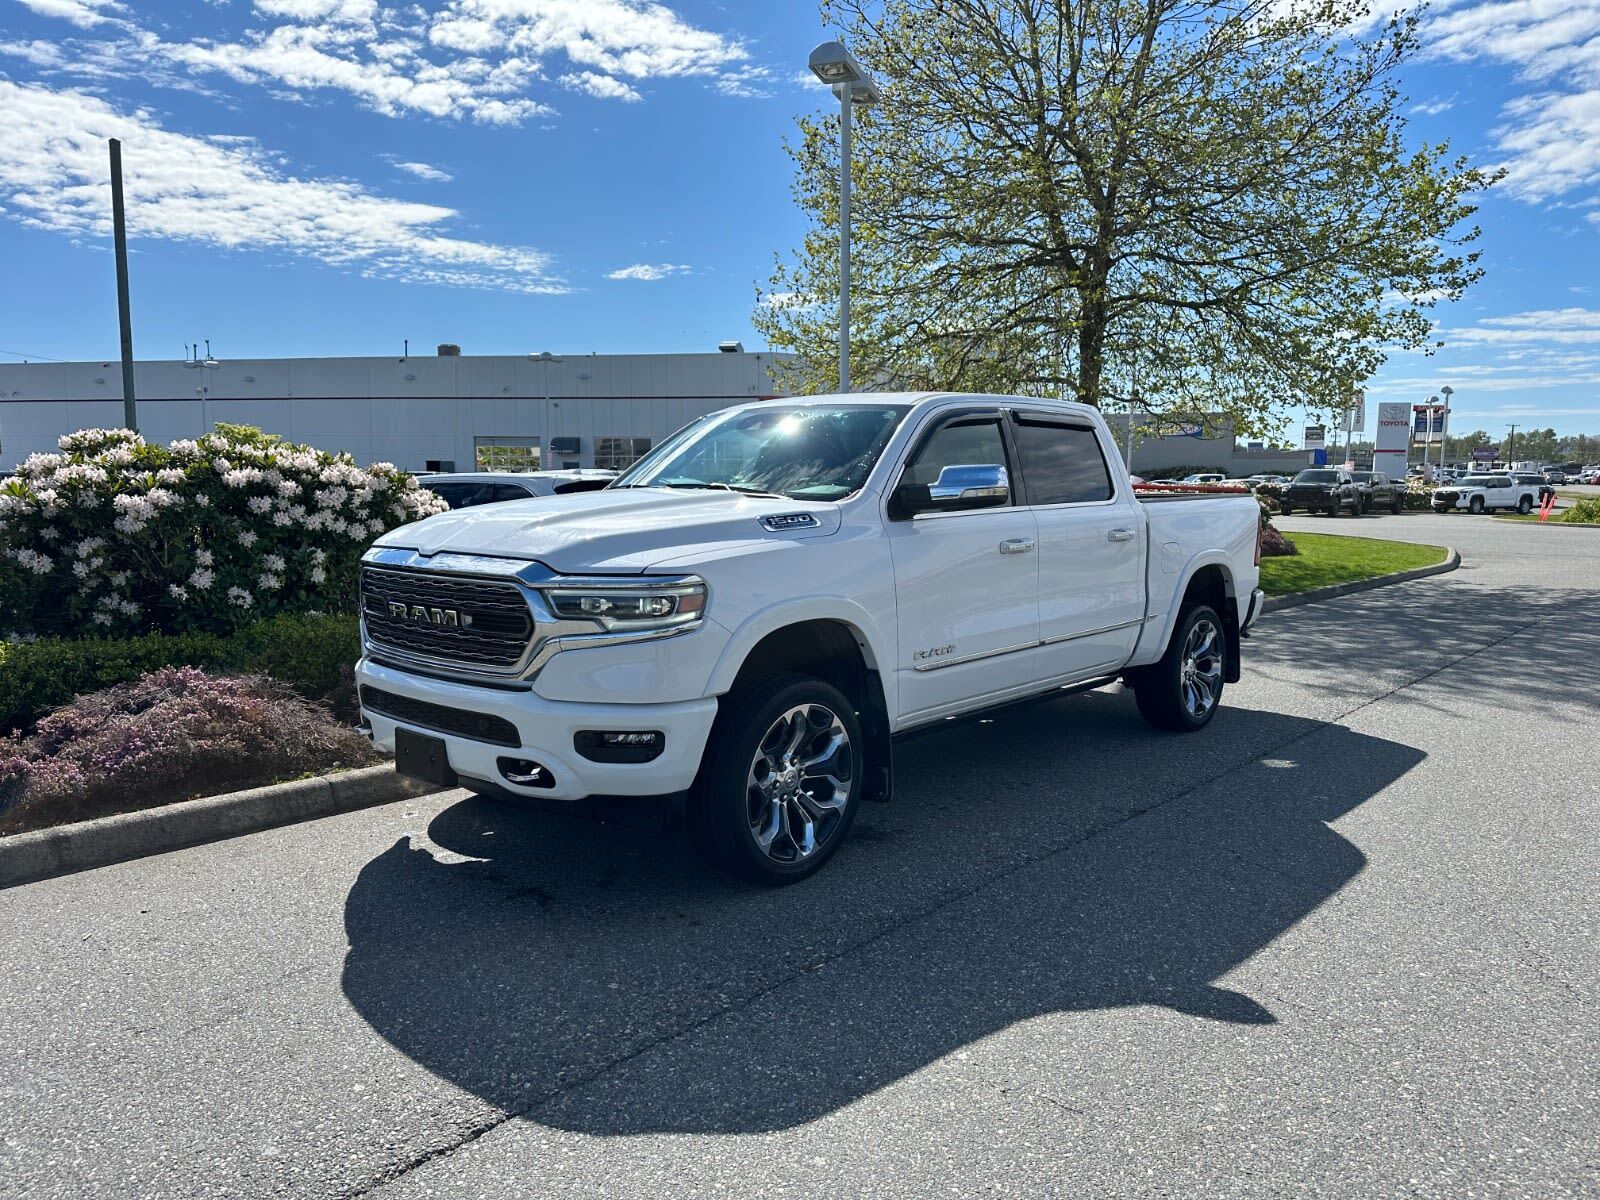 2021 Ram 1500 LIMITED; AUTOMATIC, PANORAMIC SUNROOF, 4WD, HEATED